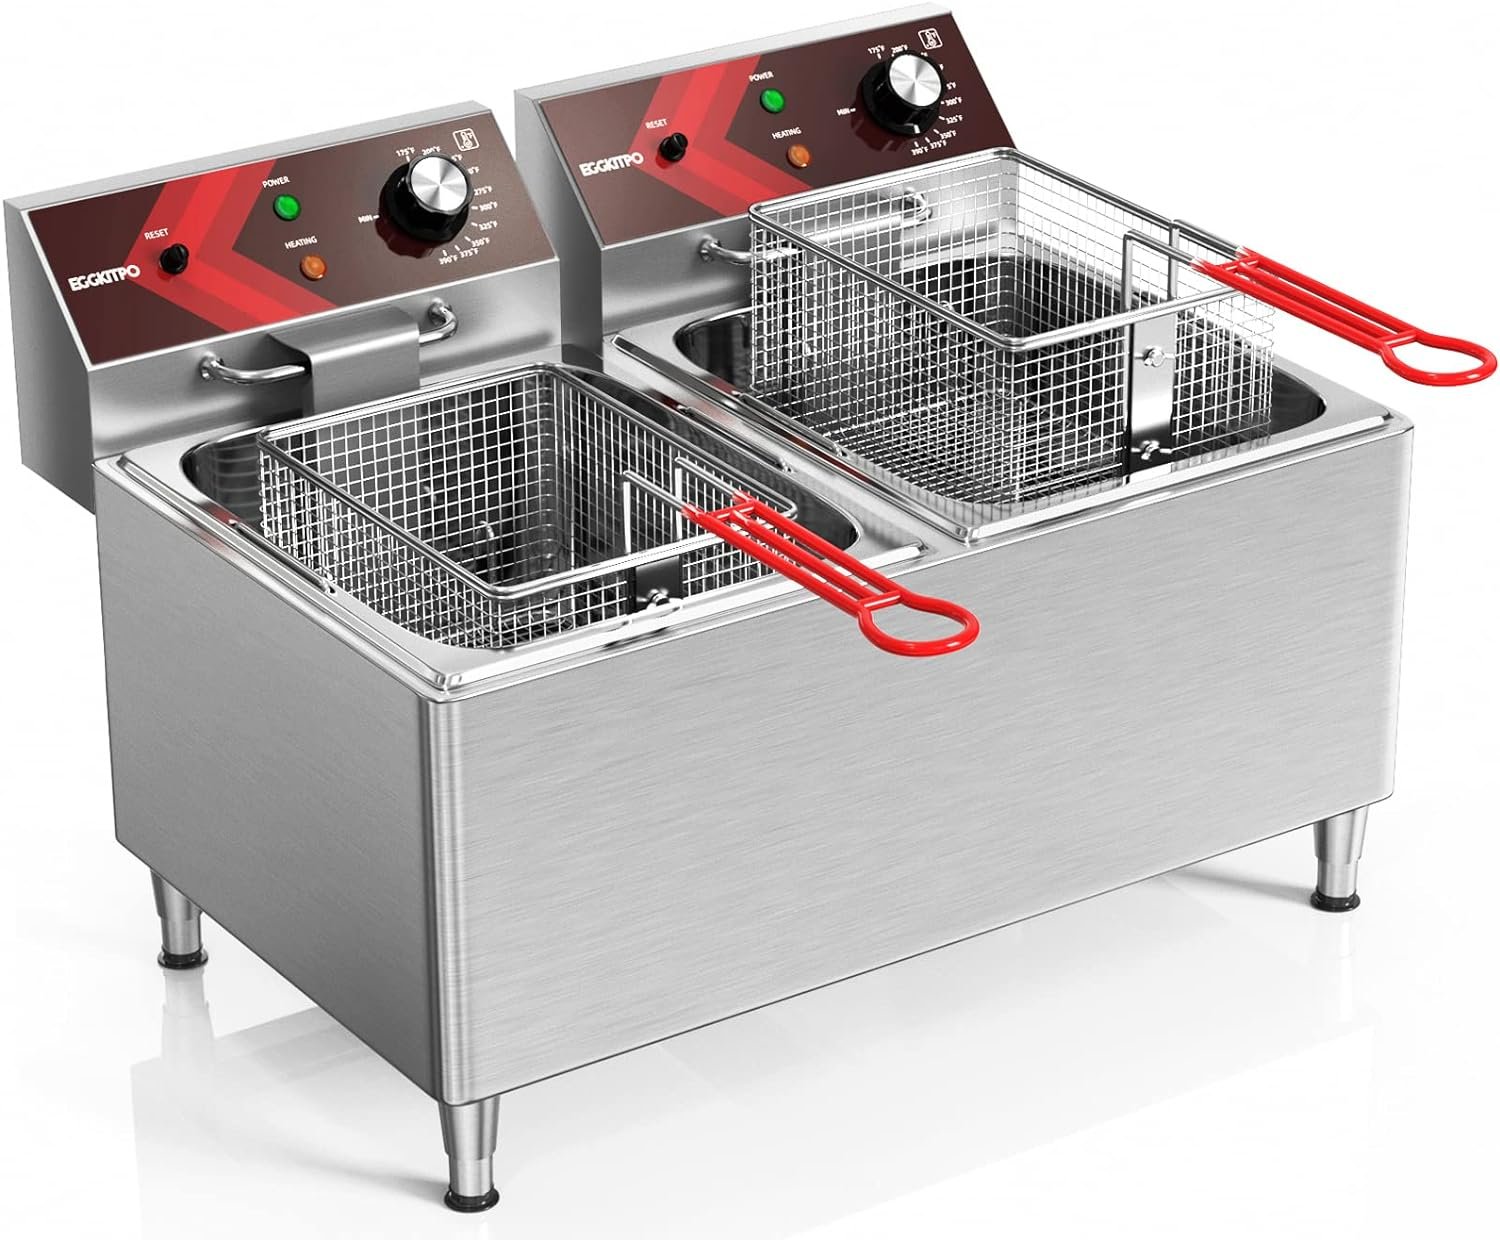 EGGKITPO Deep fryers Commercial Deep Fryer 12L x 2 Large Dual Tank Electric Countertop Fryer for Restaurant with 2 Frying Baskets and Lids, 1800W x 2, 120V